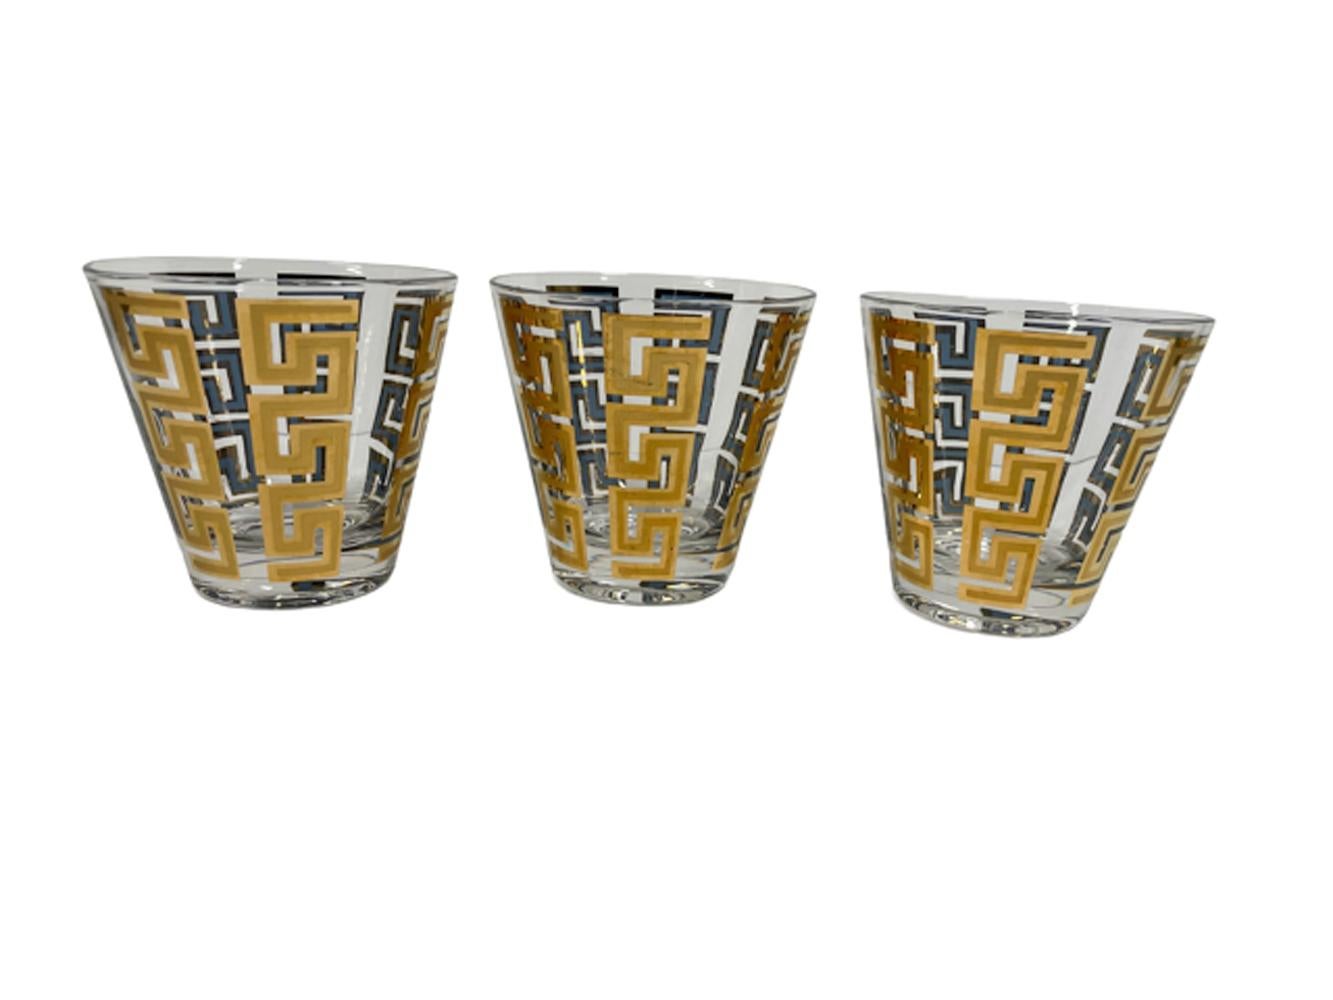 Six Culver, LTD. old fashioned glasses with tapered sides having vertical Greek Key bands of 22k gold over blue enamel. The gold with satin finish within gloss on the exterior with the blue visible only on the interior with gold border.